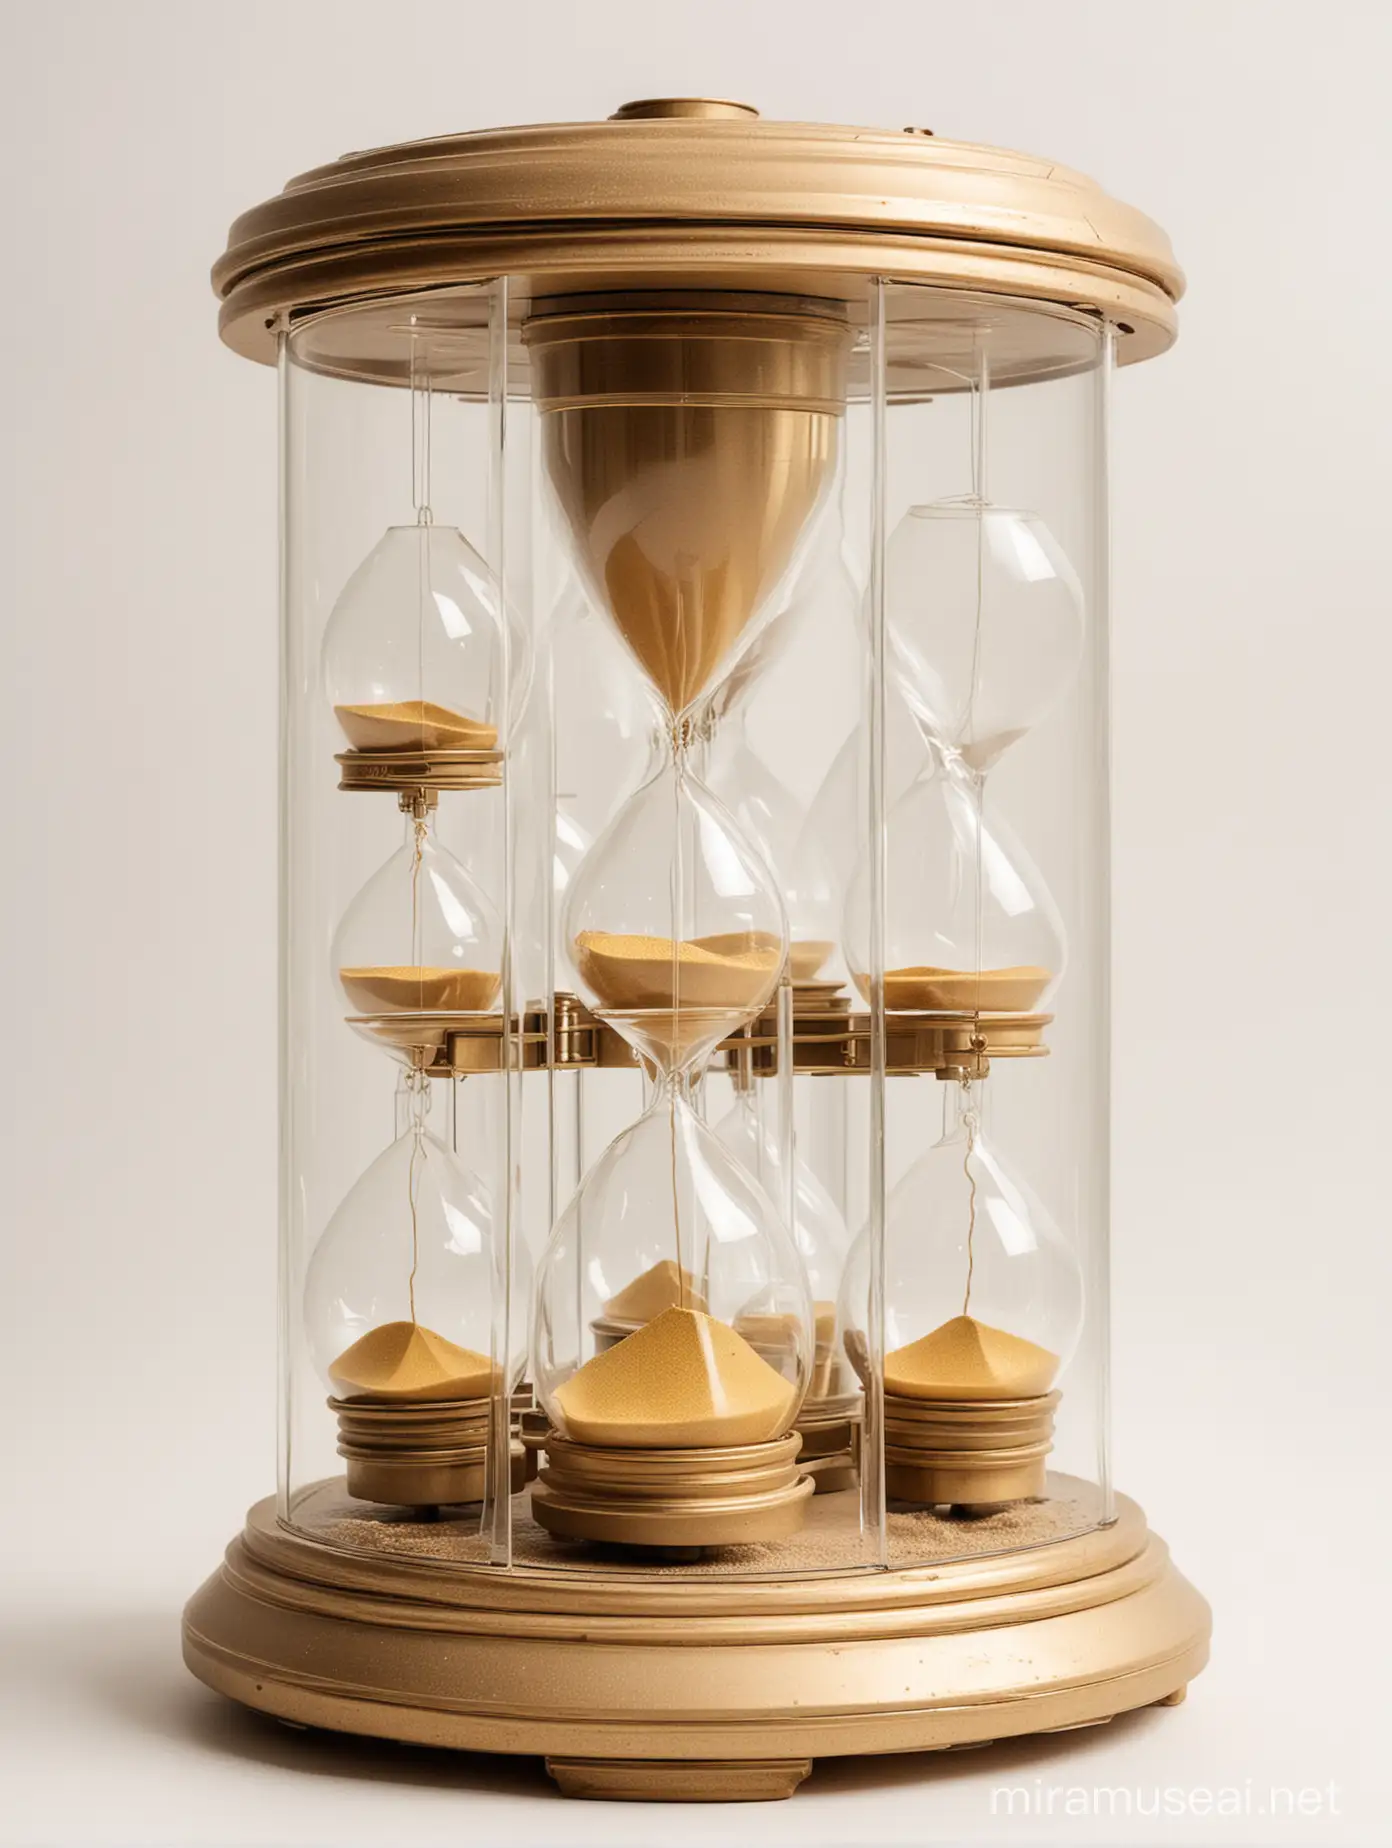 Vintage timemachine made from 6 hourglasses. Banks are situated from up to down. golden sand inside. Clear white backround.